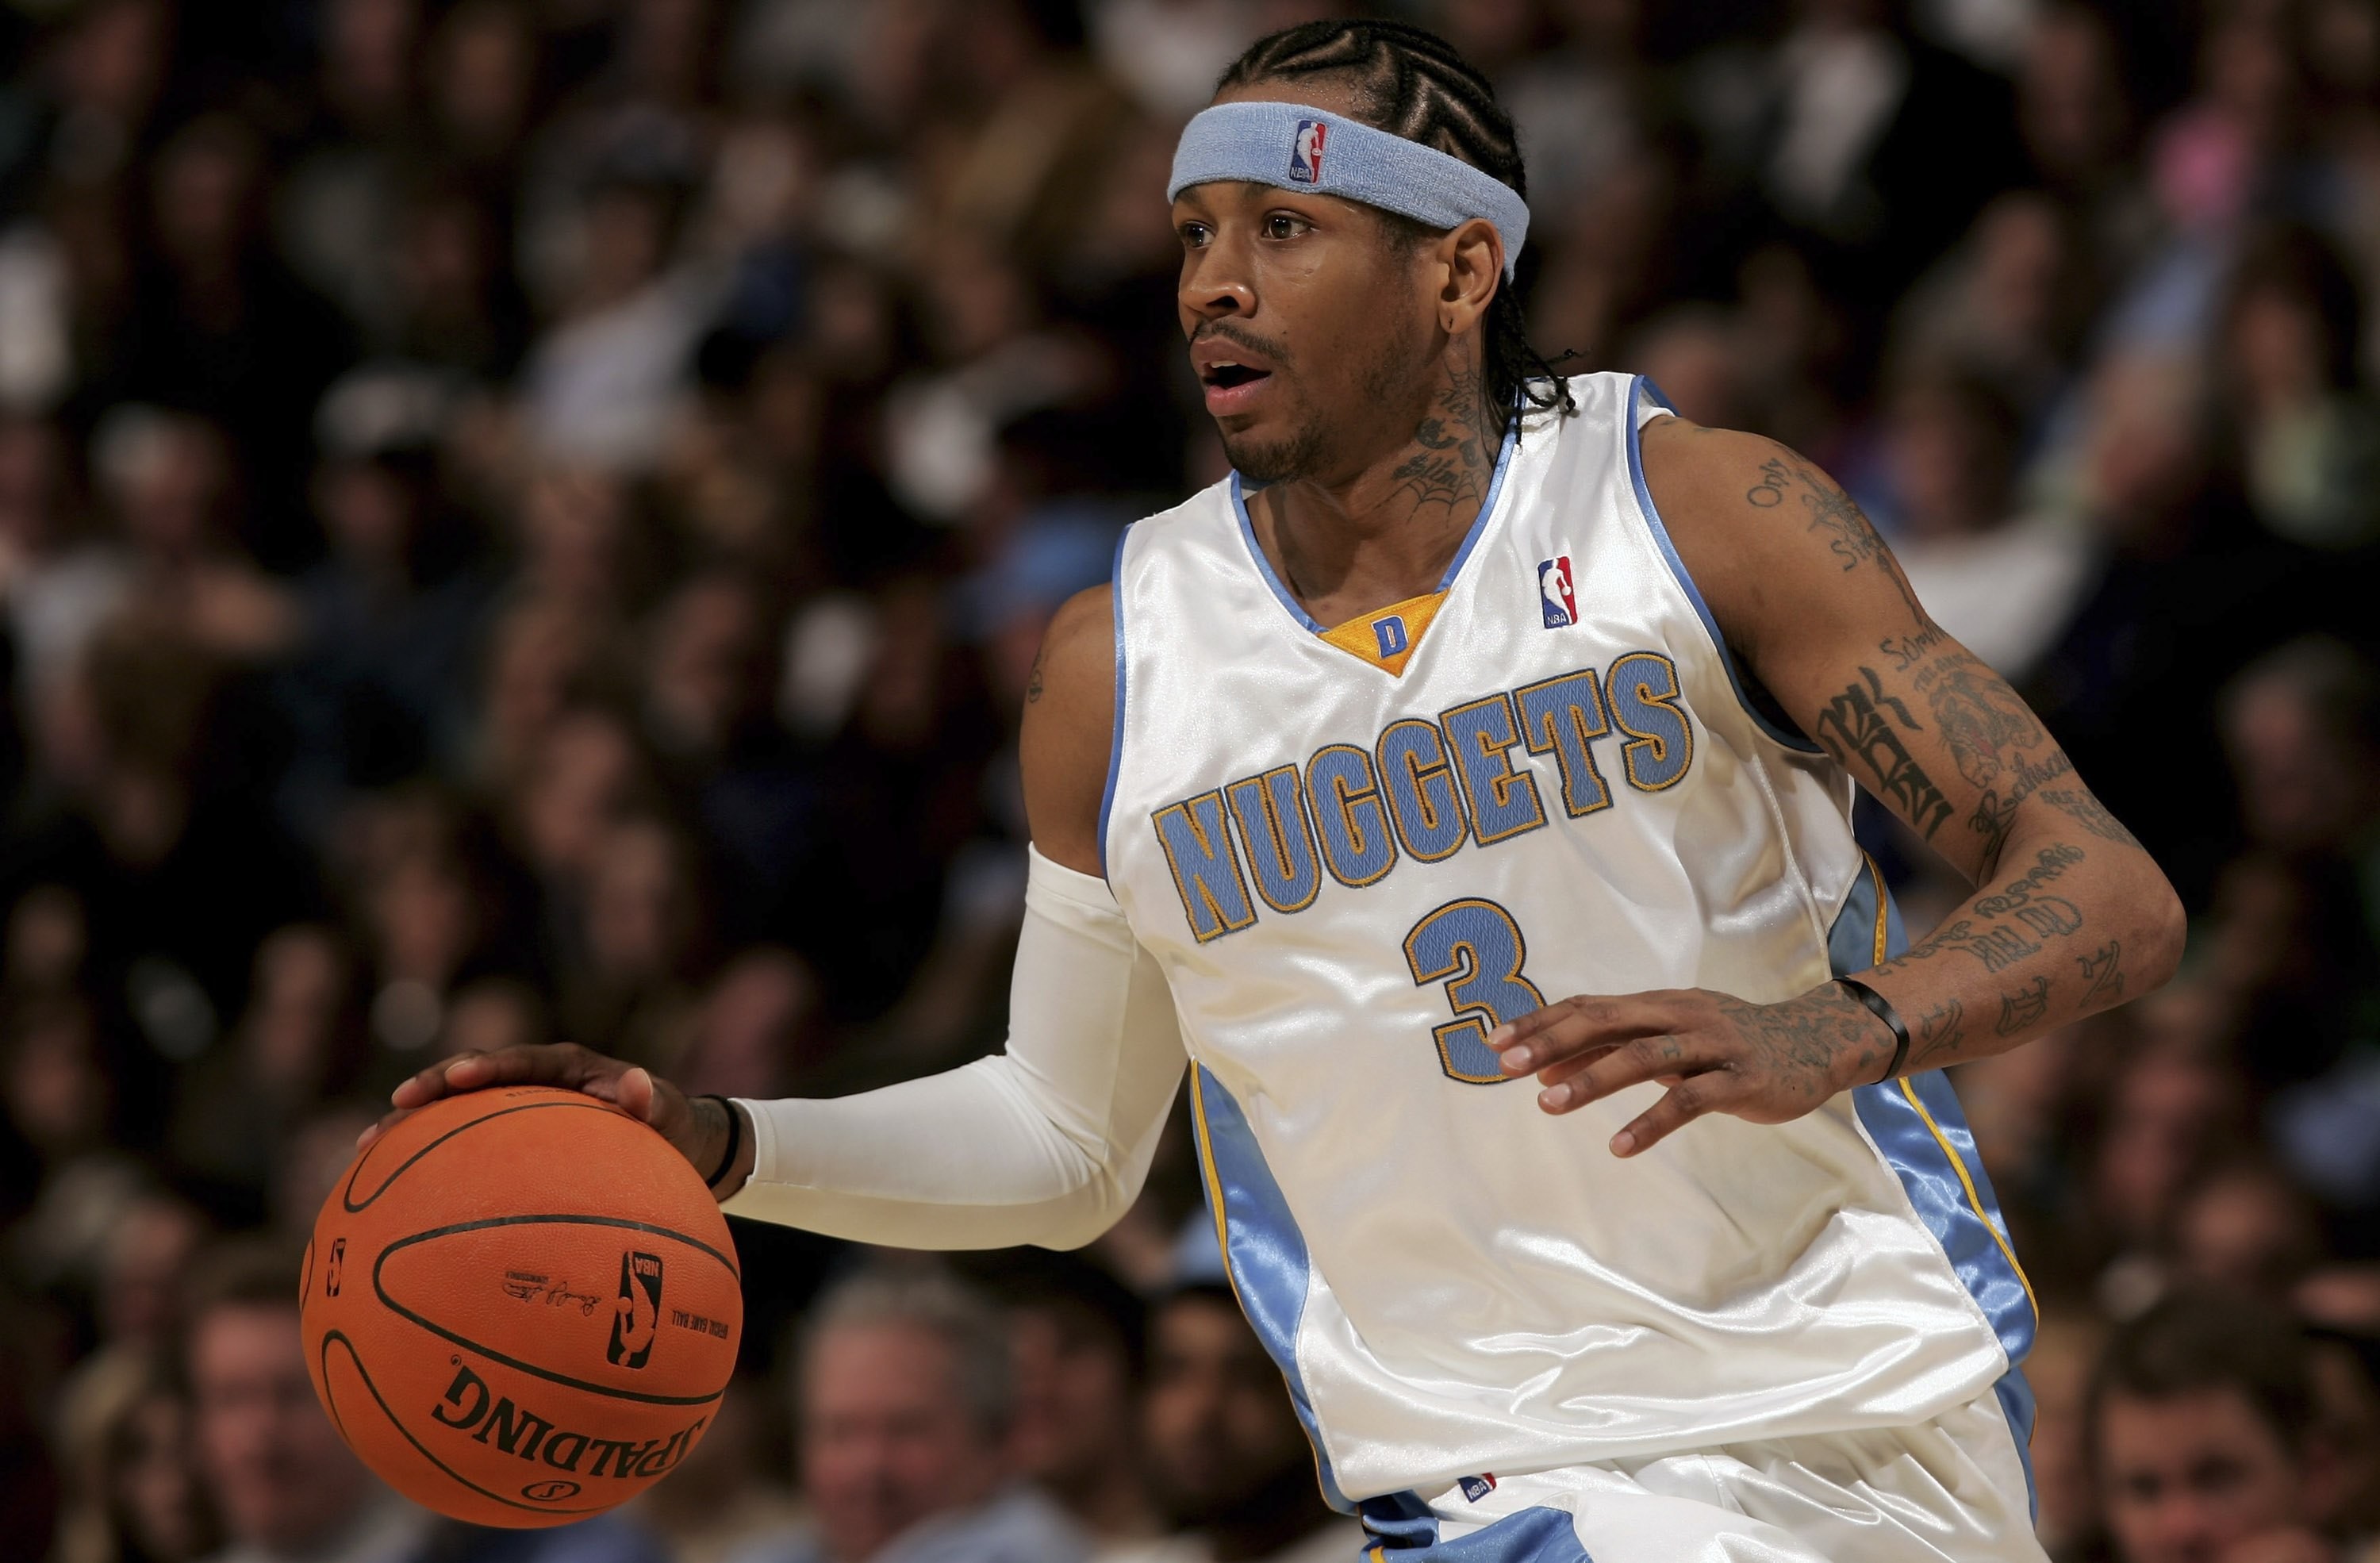 Get free high quality HD wallpapers allen iverson wallpaper hd